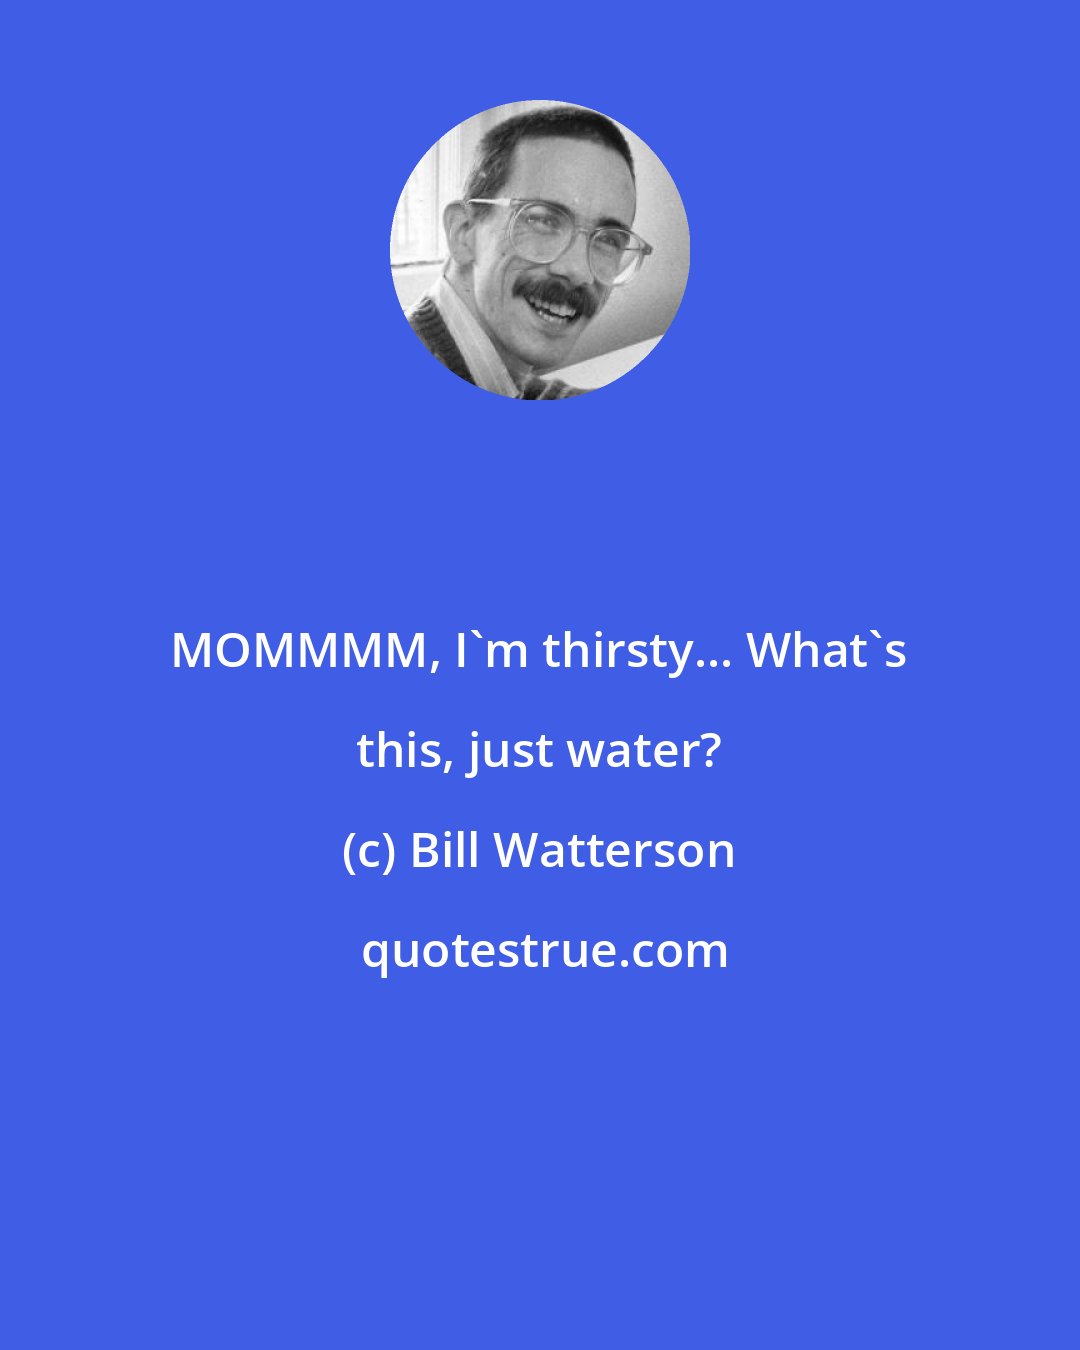 Bill Watterson: MOMMMM, I'm thirsty... What's this, just water?